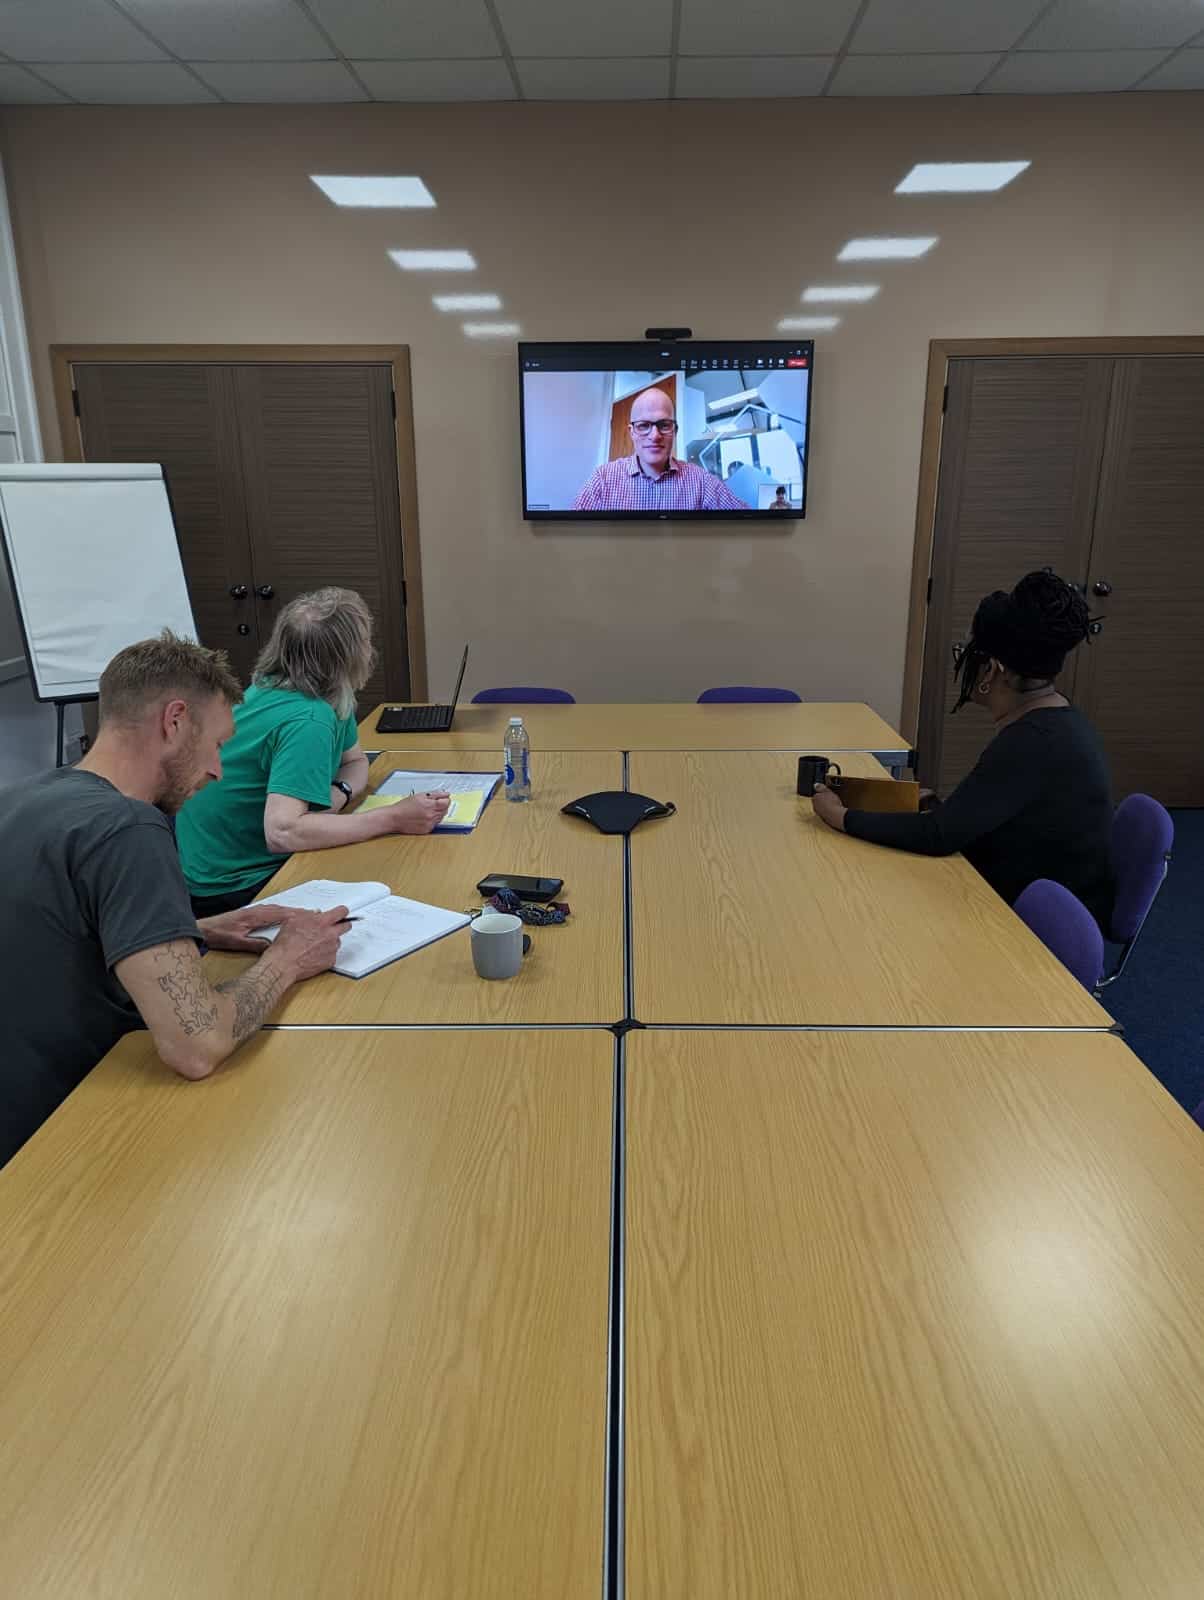 A conference room with three people seated around a table and looking towards a tv screen with a person speaking using video conferencing.